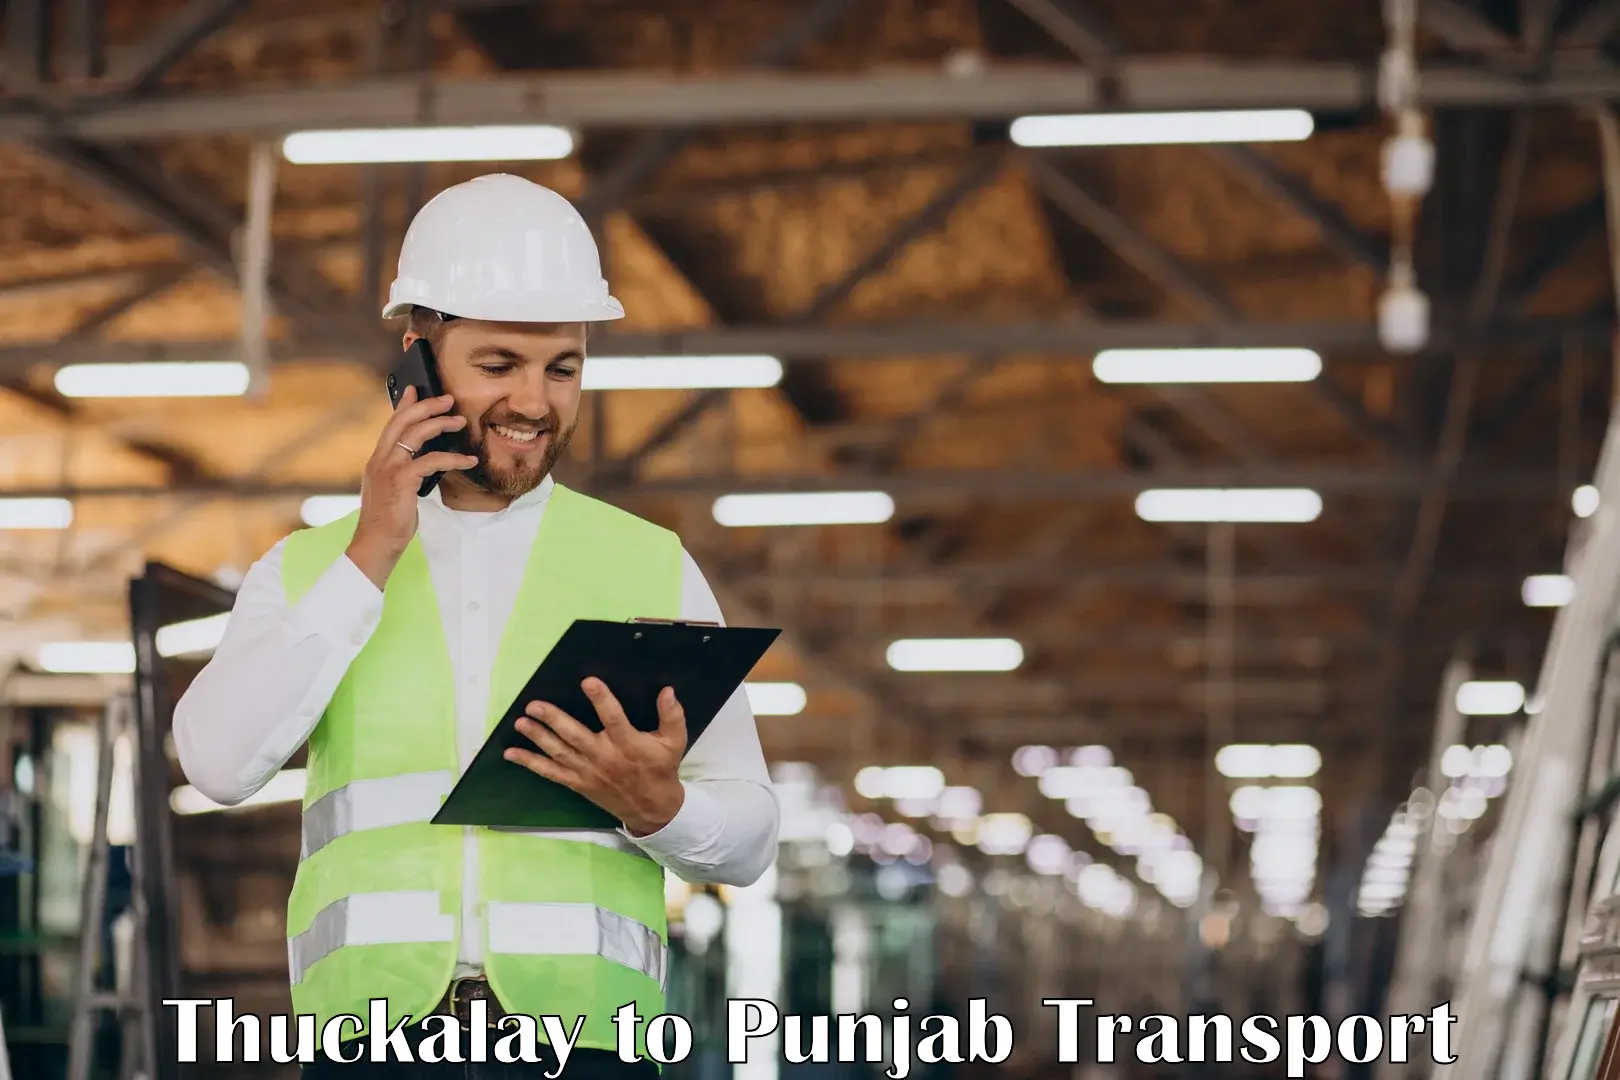 Goods delivery service Thuckalay to Jhunir